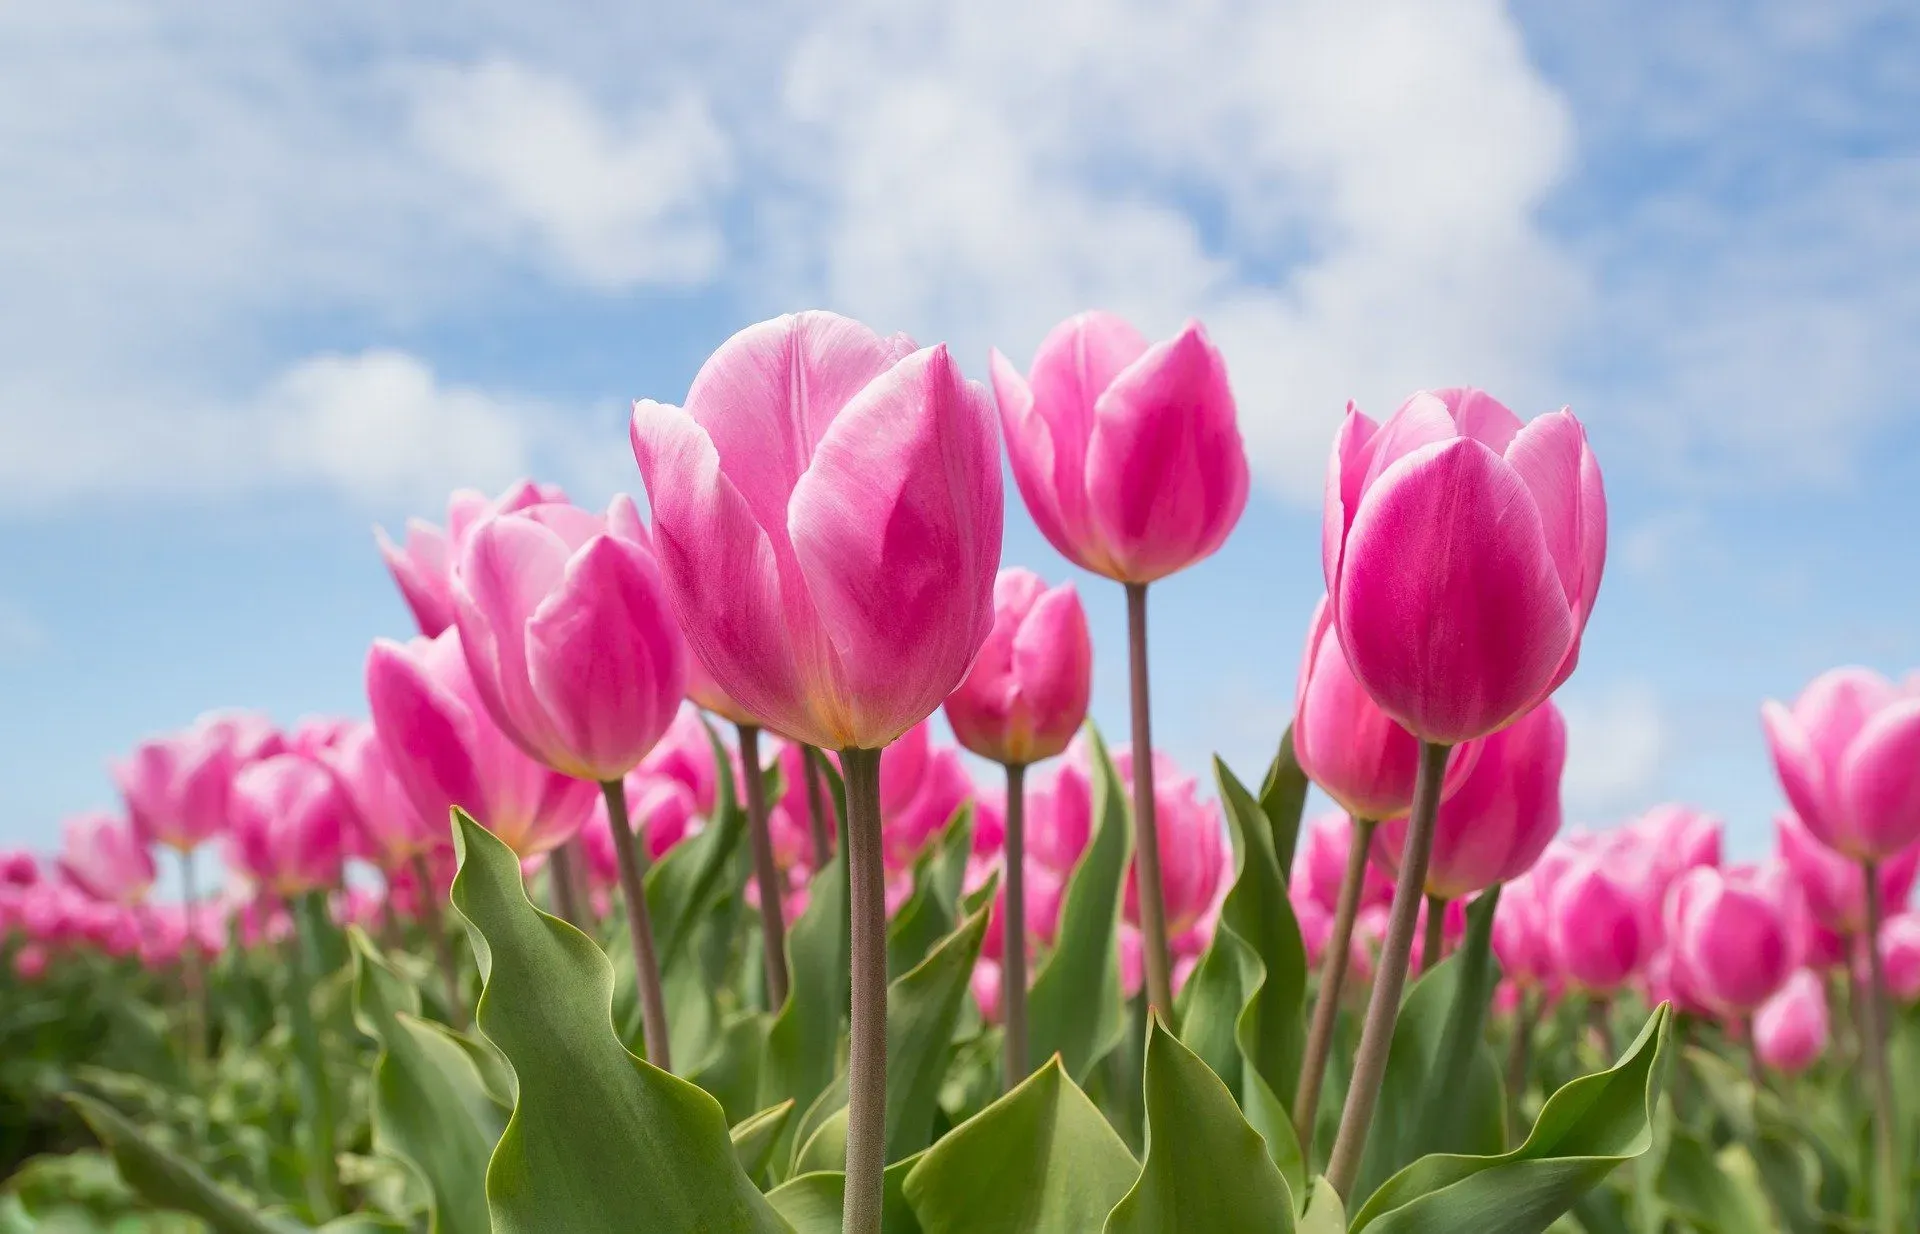 When cat parents see their felines eating flowers they wonder, are tulips poisonous to cats?